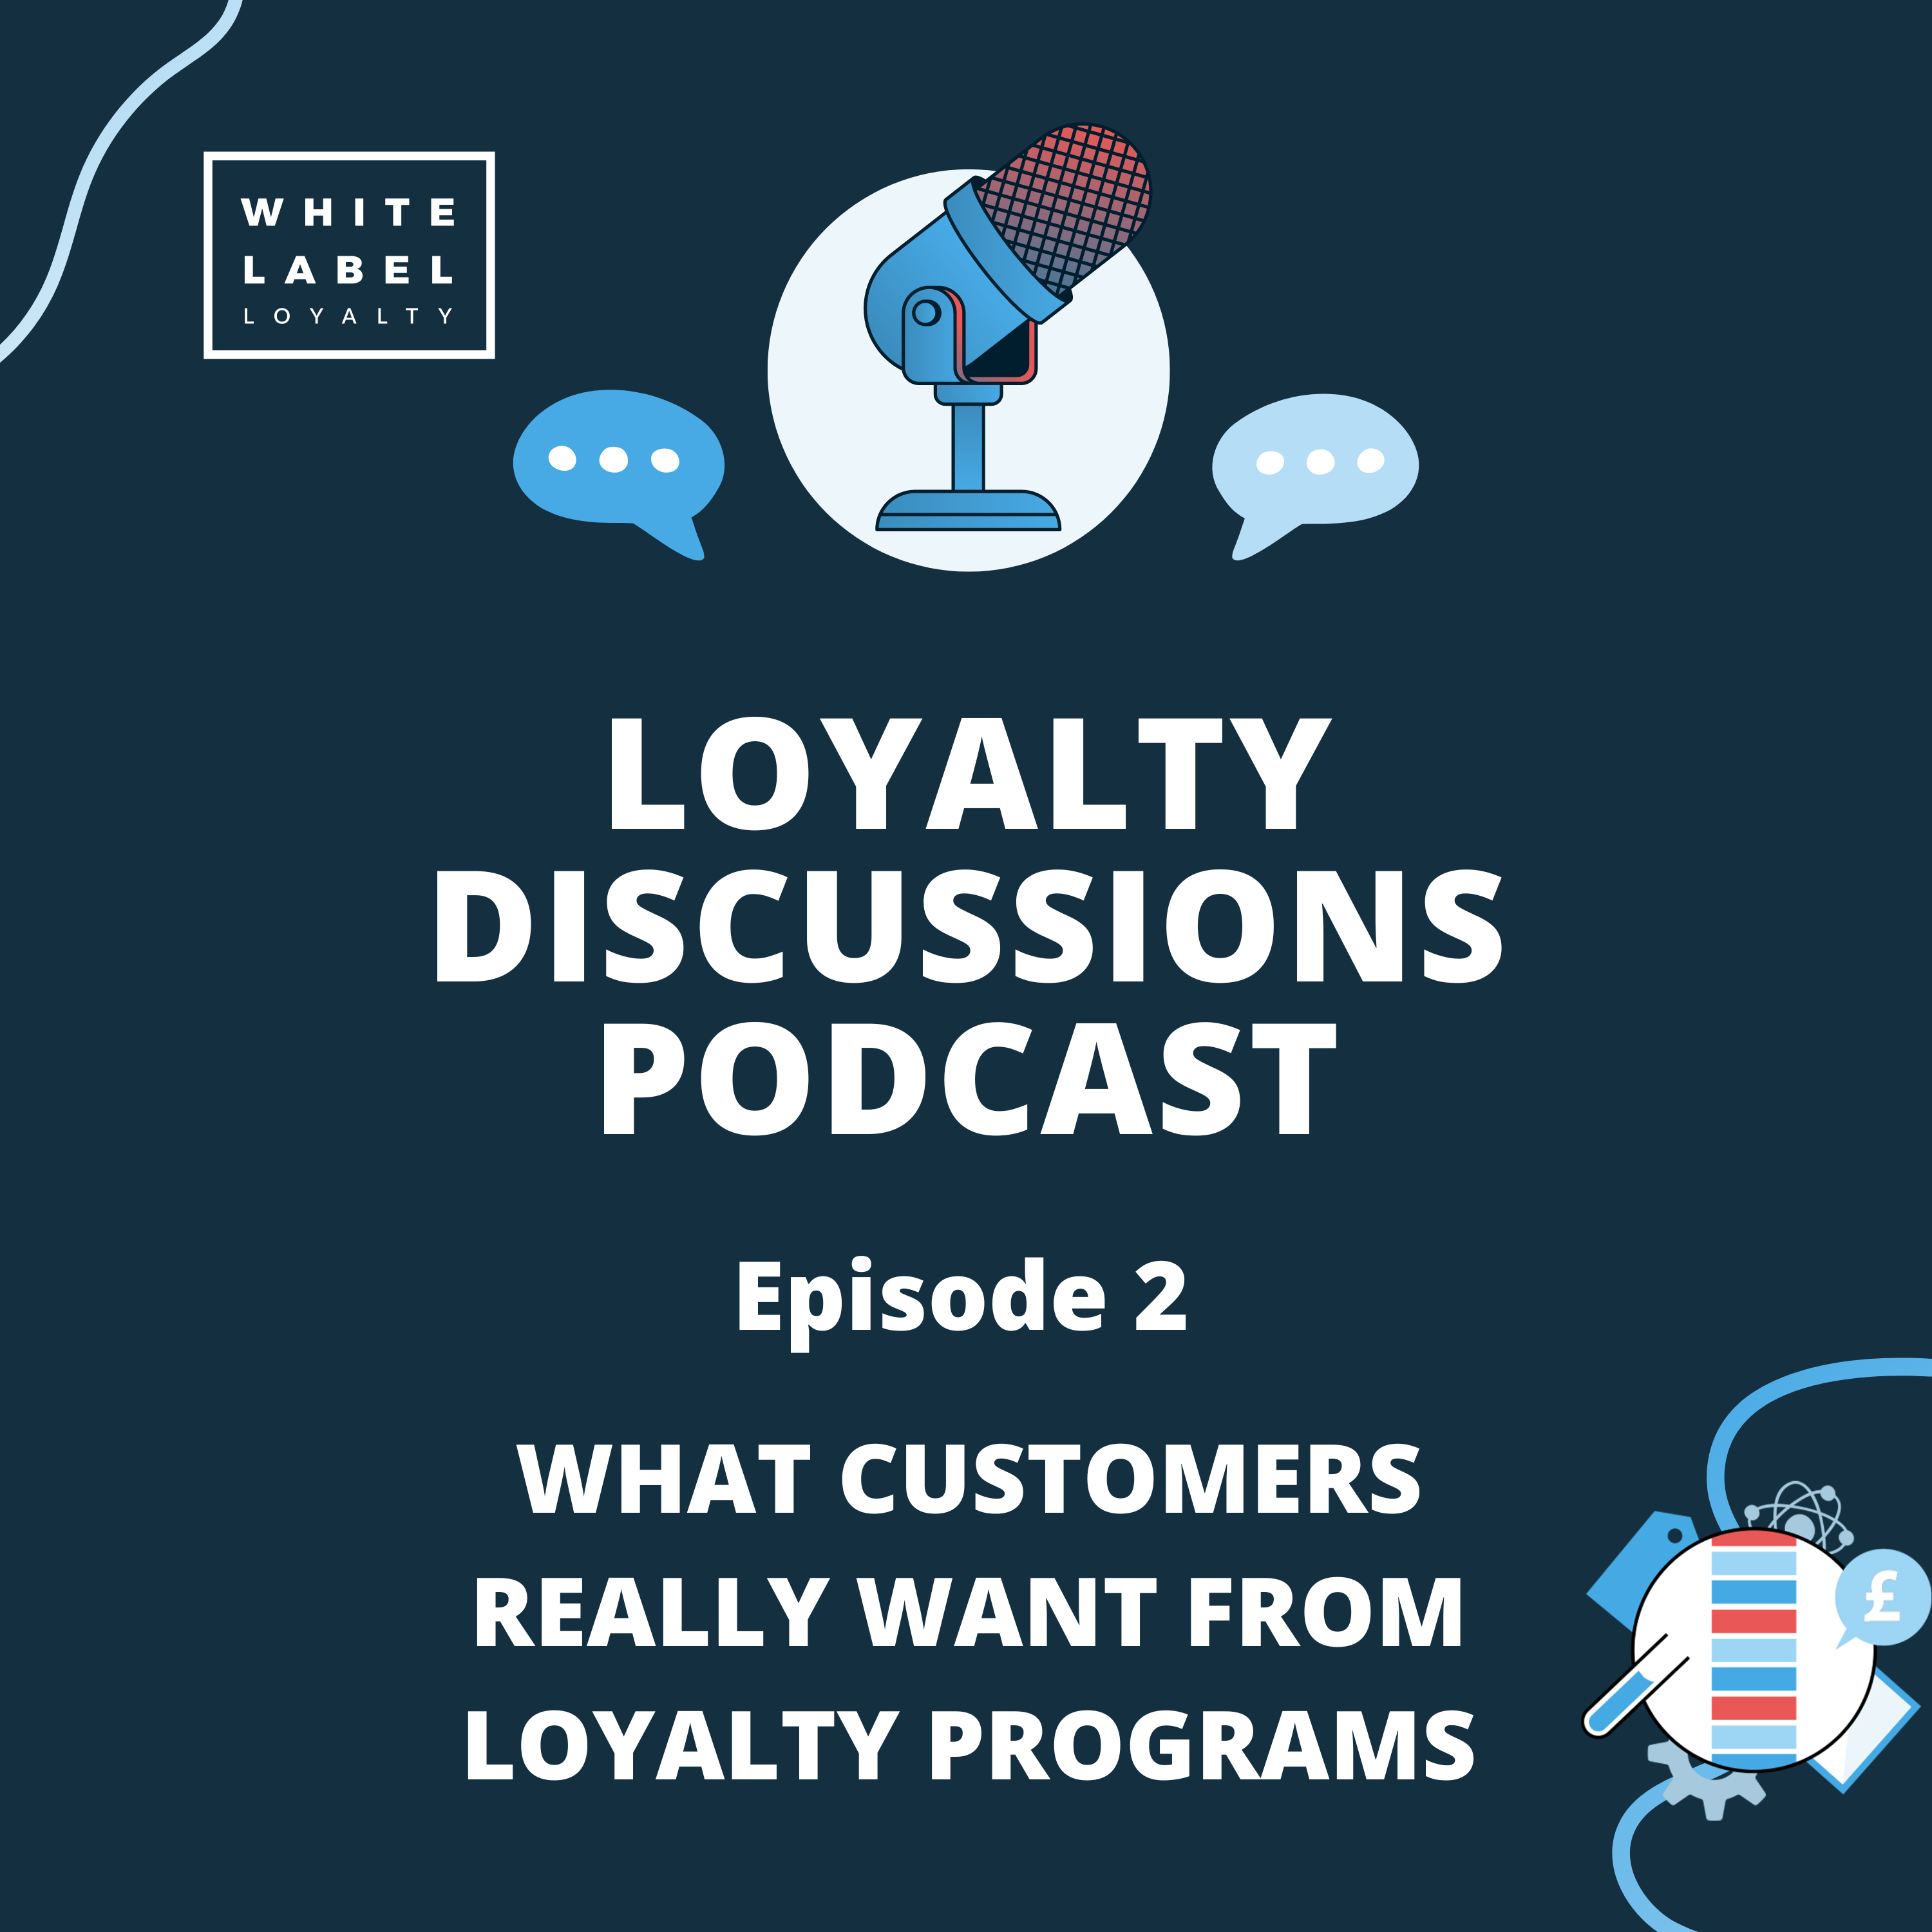 What customers want from loyalty programs: studies and research